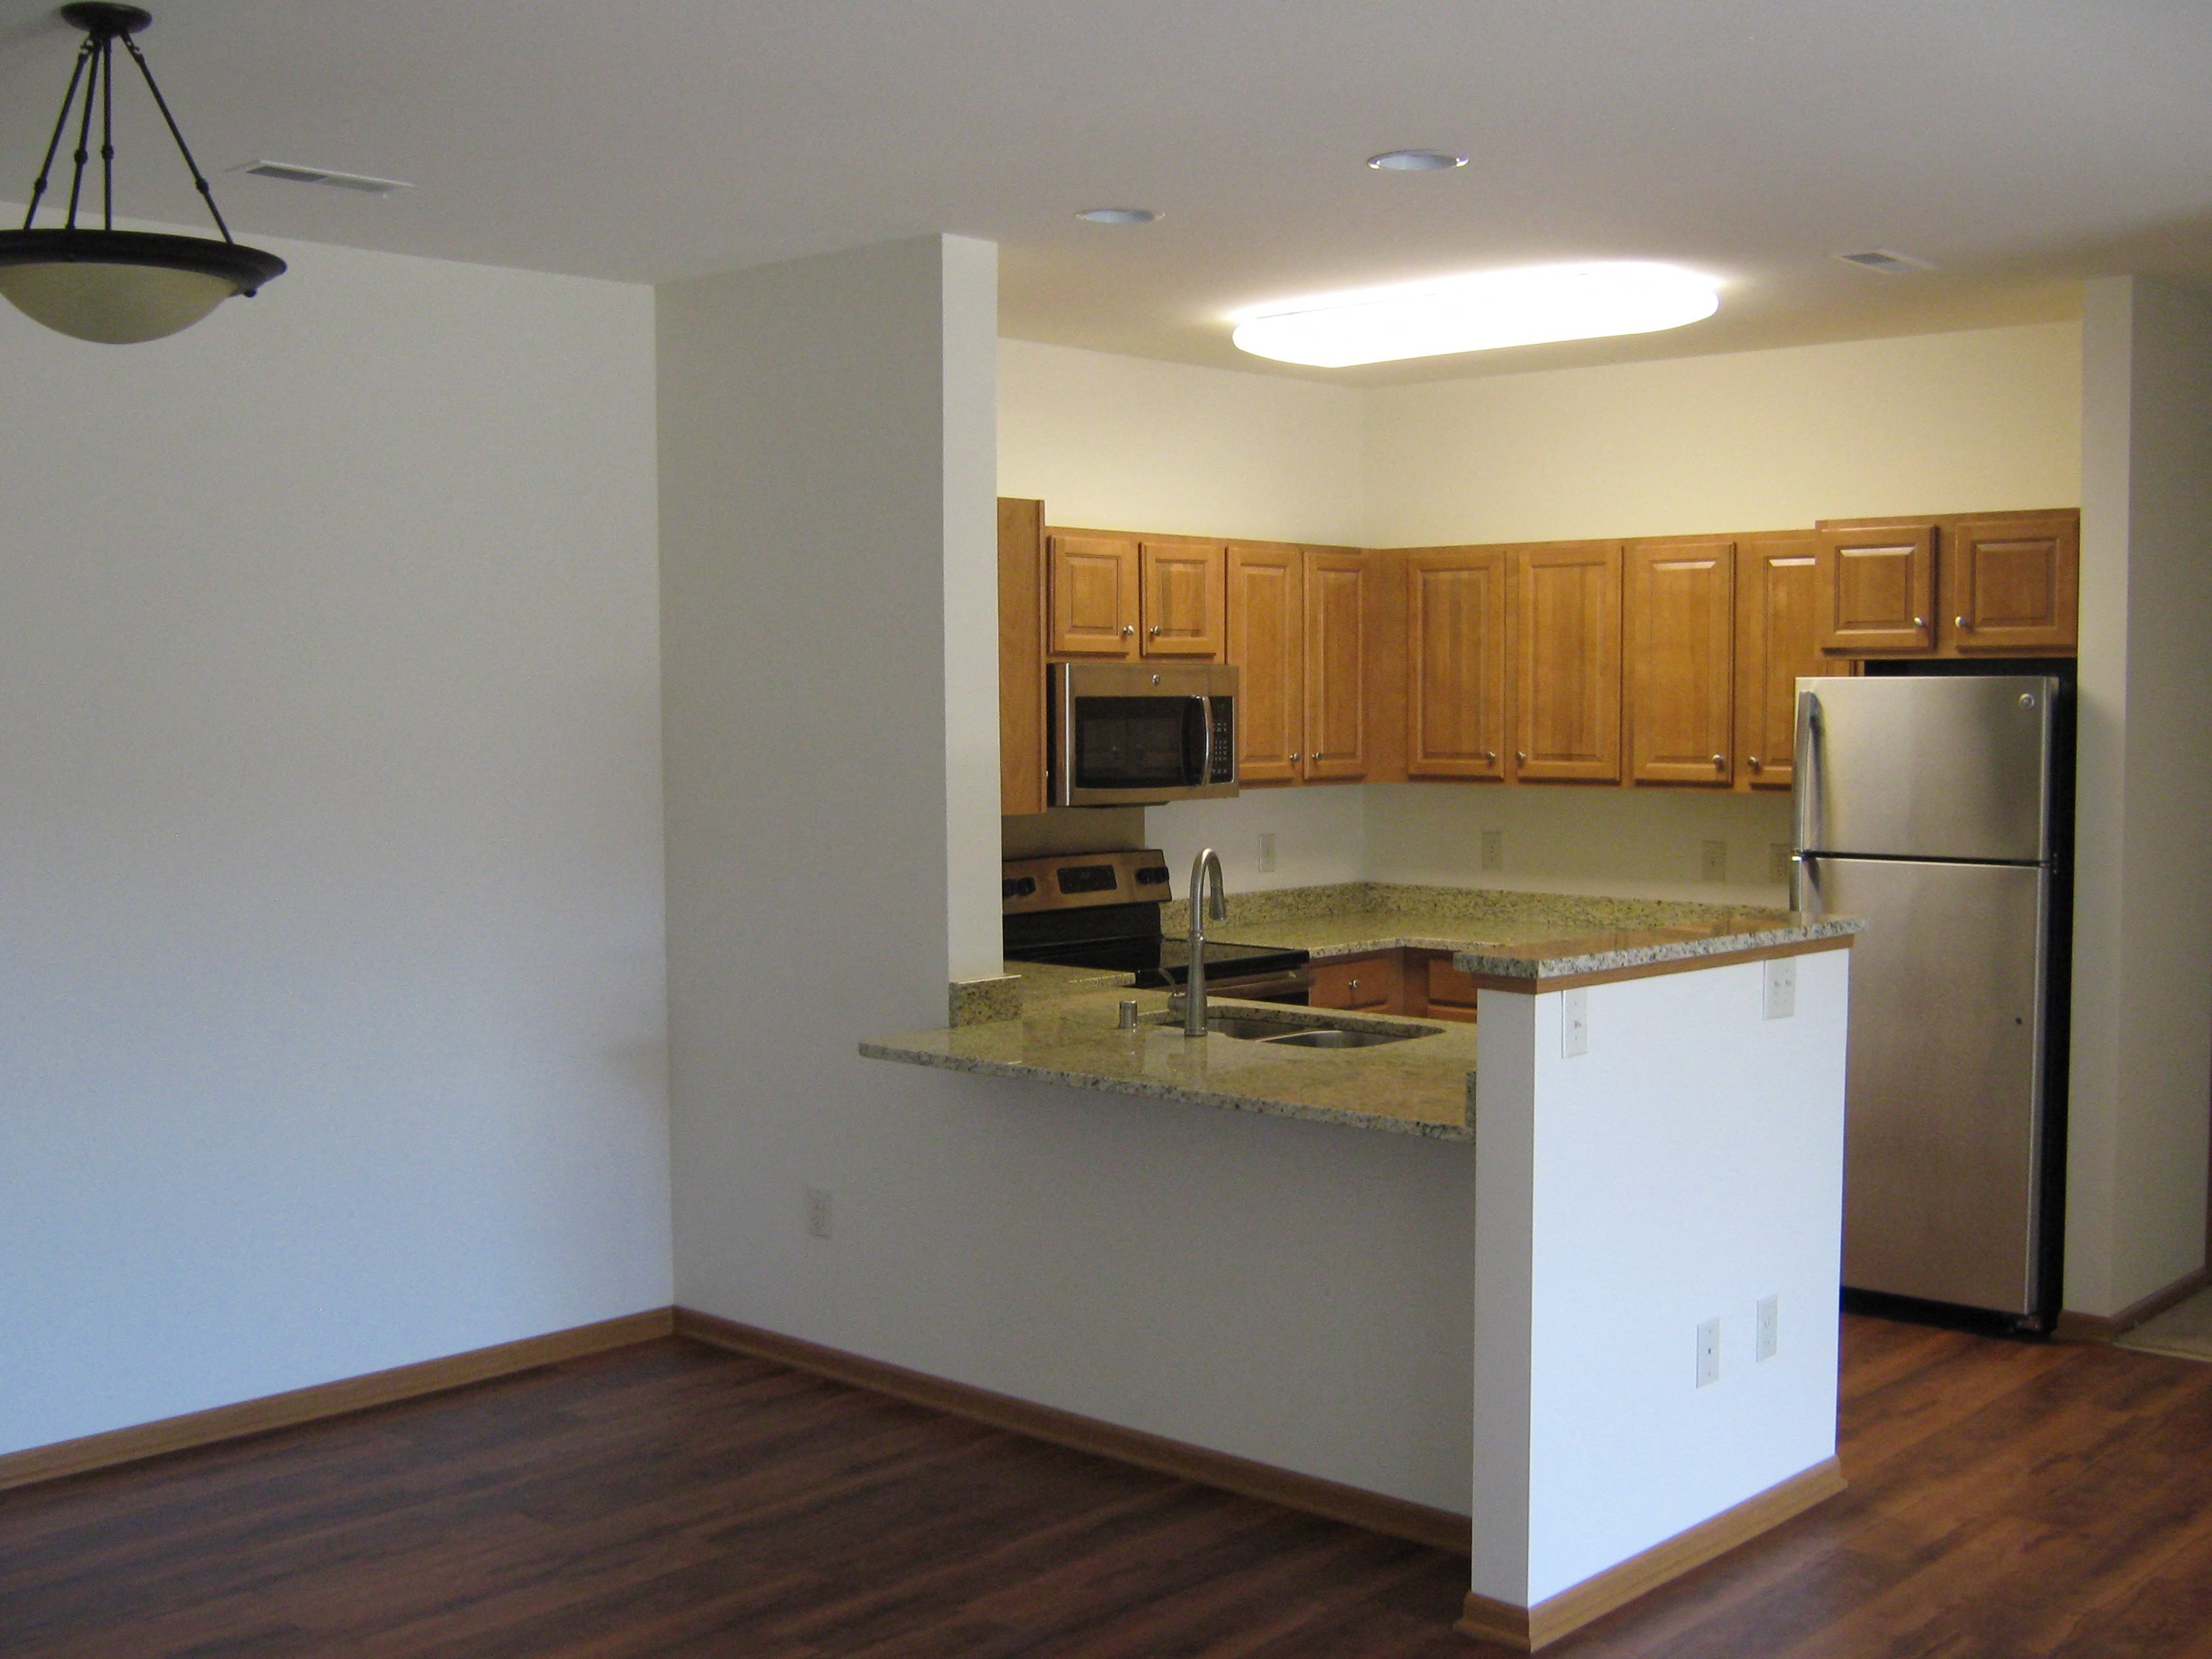 Gourmet Kitchens with Dishwasher and Disposal at Foresthill Highlands Apartments & Townhomes 55+, Franklin, WI,53132